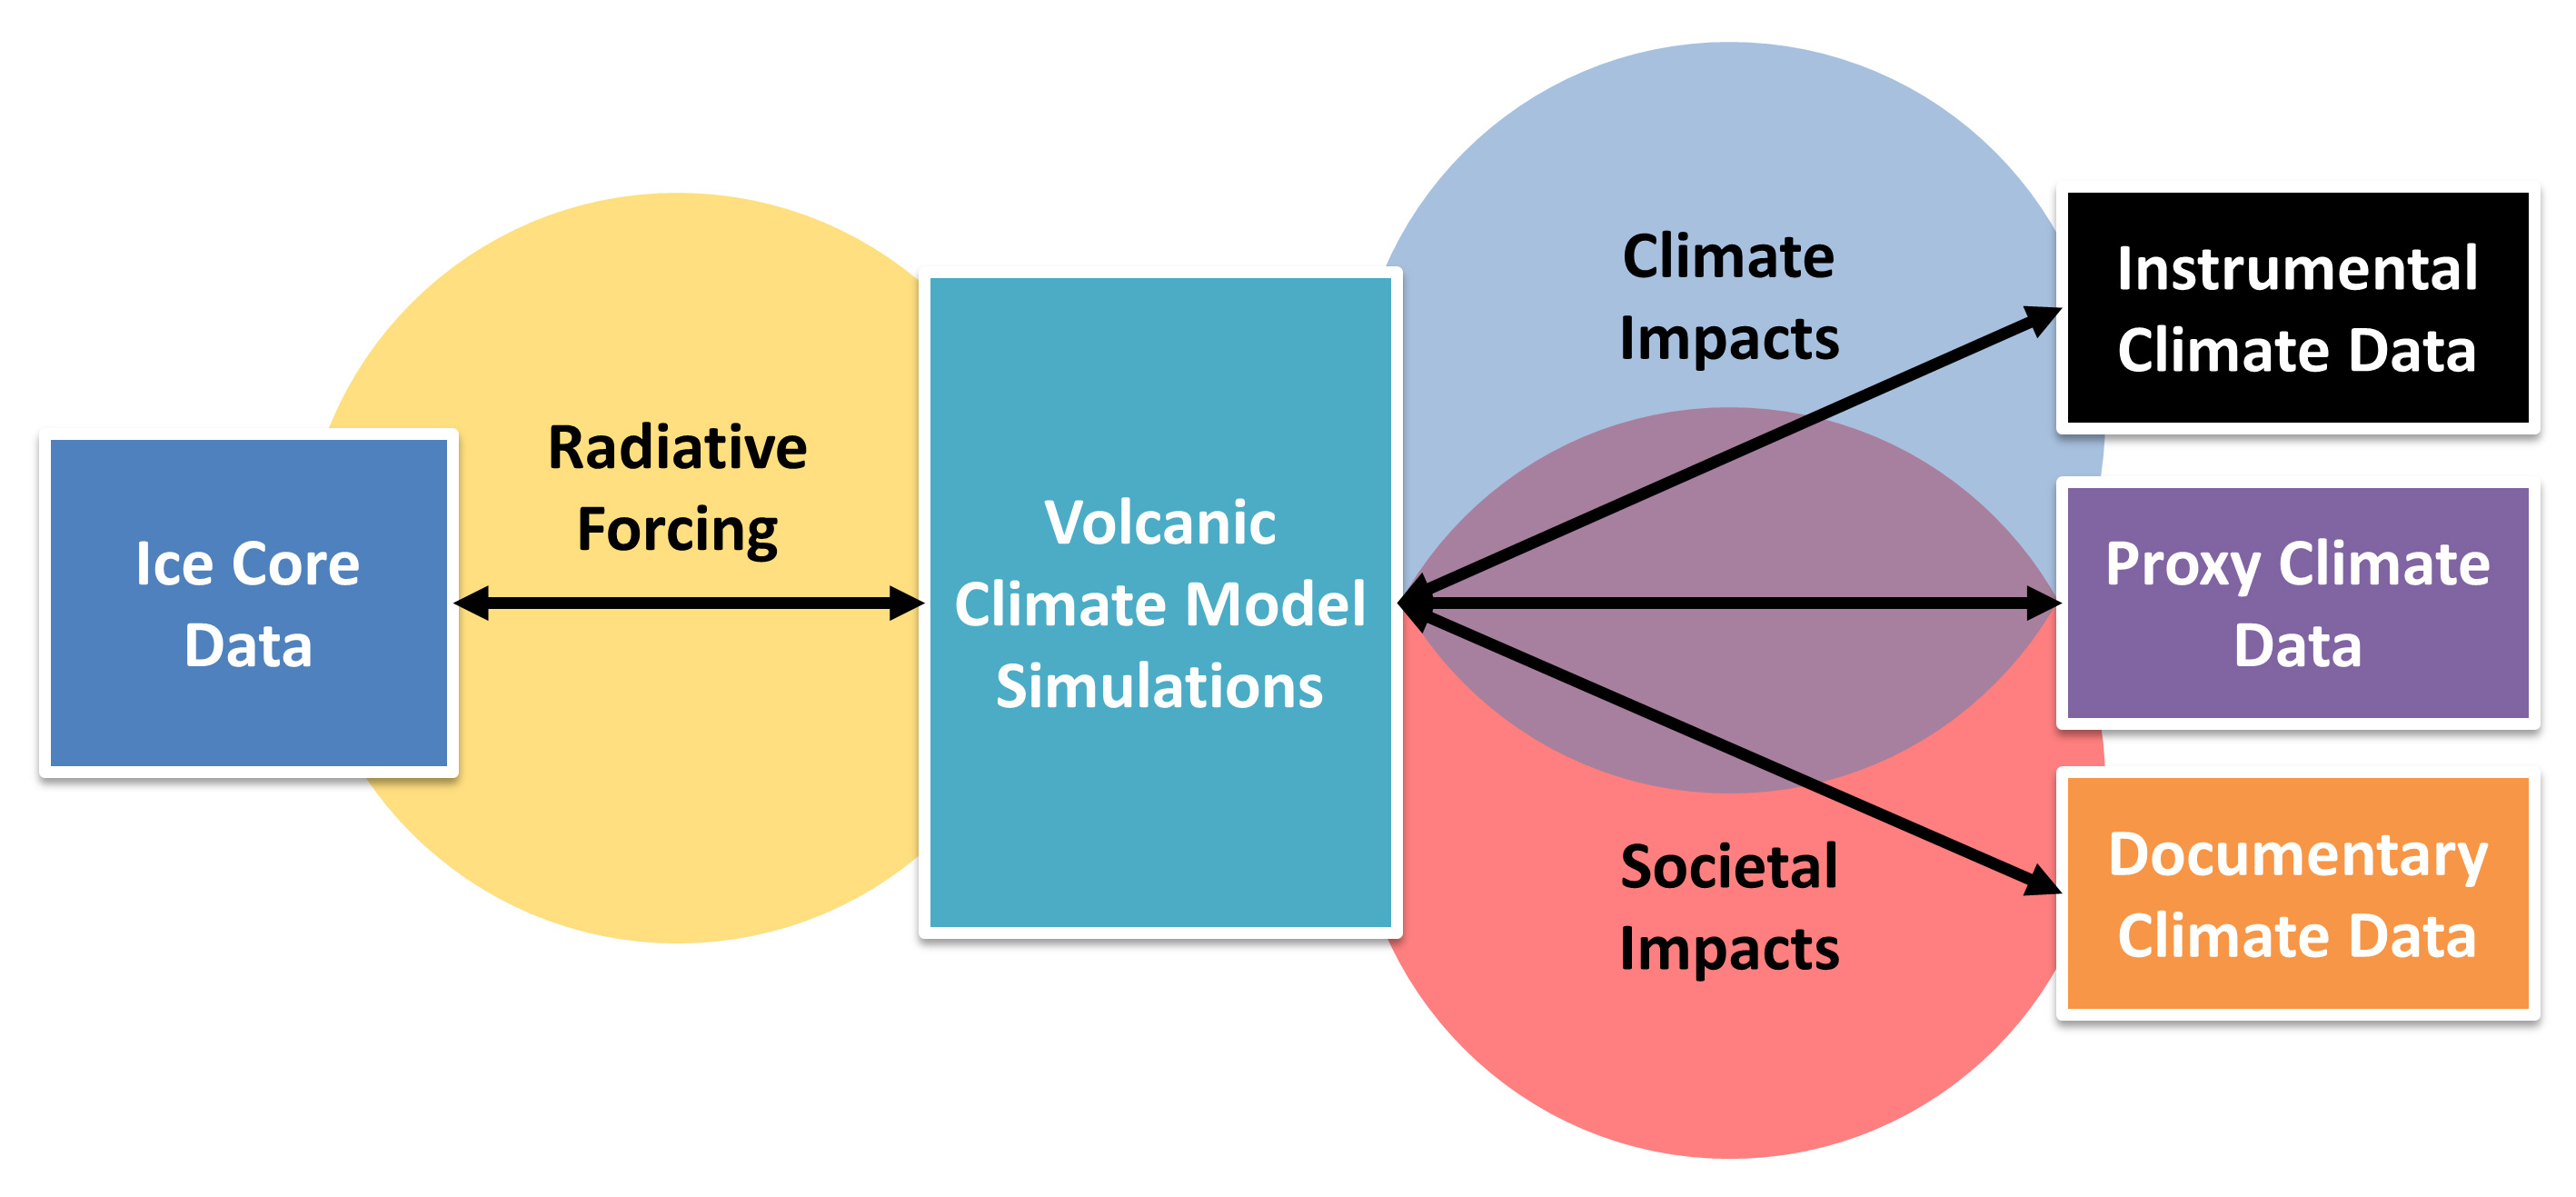 Figure 2: The VICS working group focuses on the synergy between paleodata and climate-model simulations. Proxy data is used to reconstruct the radiative forcing of past volcanic eruptions, and used in climate-model simulations of the past. Model simulations can then be compared with proxy-based climate reconstructions, documentary and instrumental data.